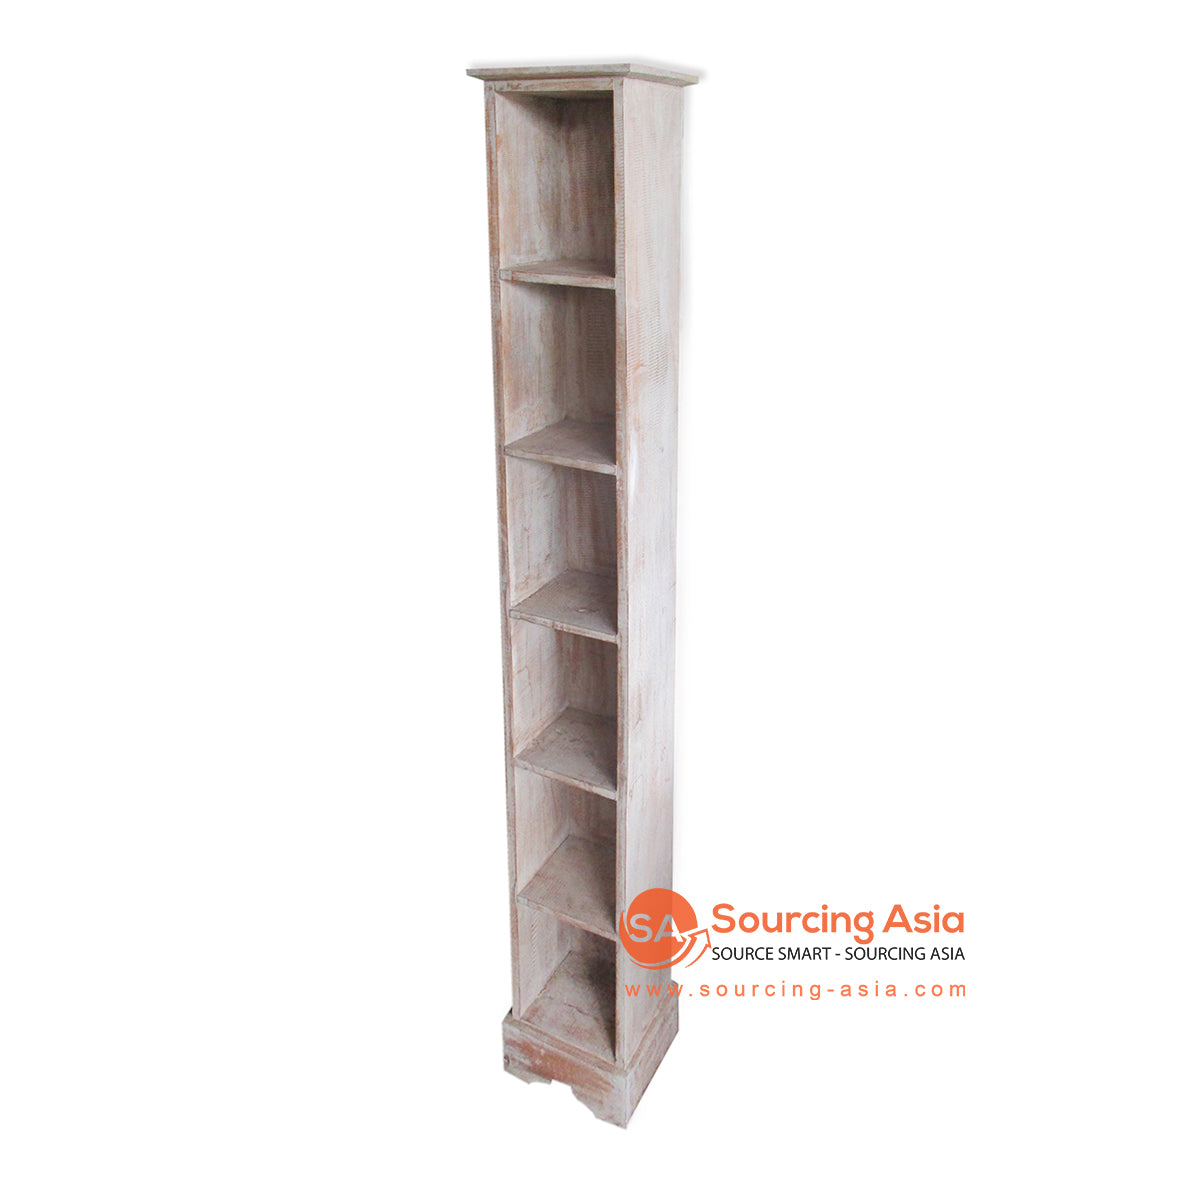 THE009-150BW BROWN WASH WOODEN DVD SHELF WITH SIX SLOTS